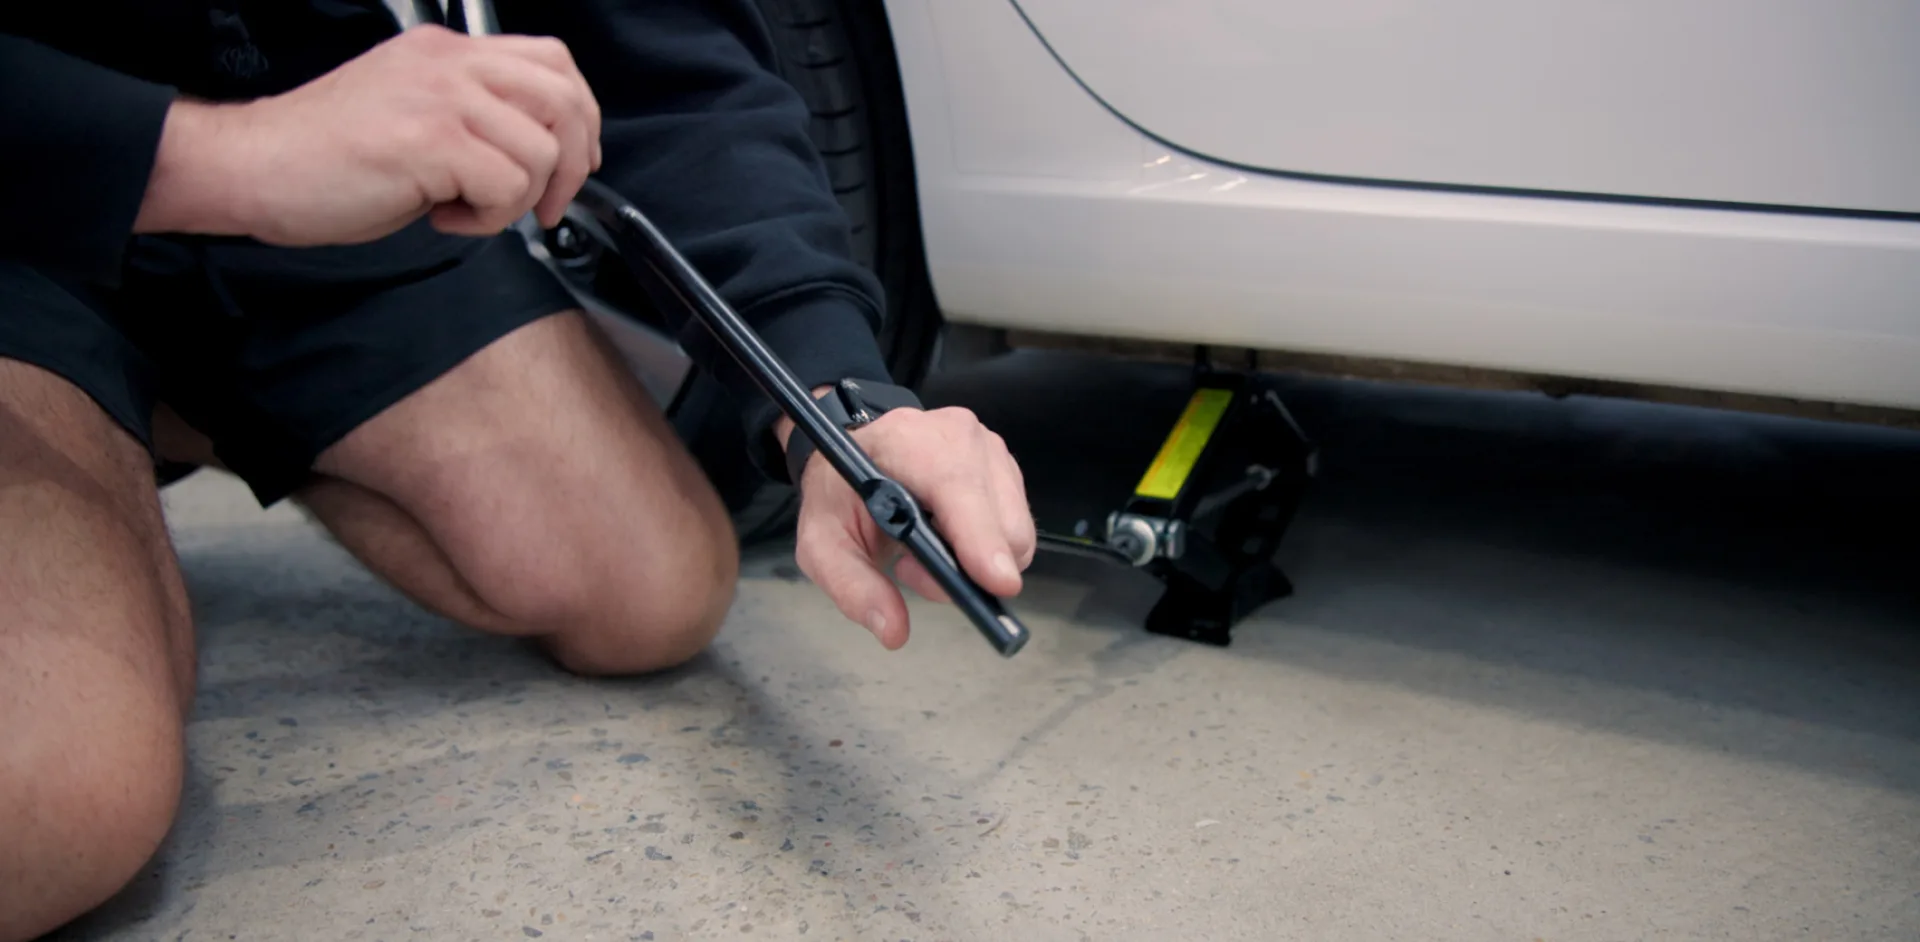 Locking a wheel brace with the cranking handle makes it easier to wind up a car jack.